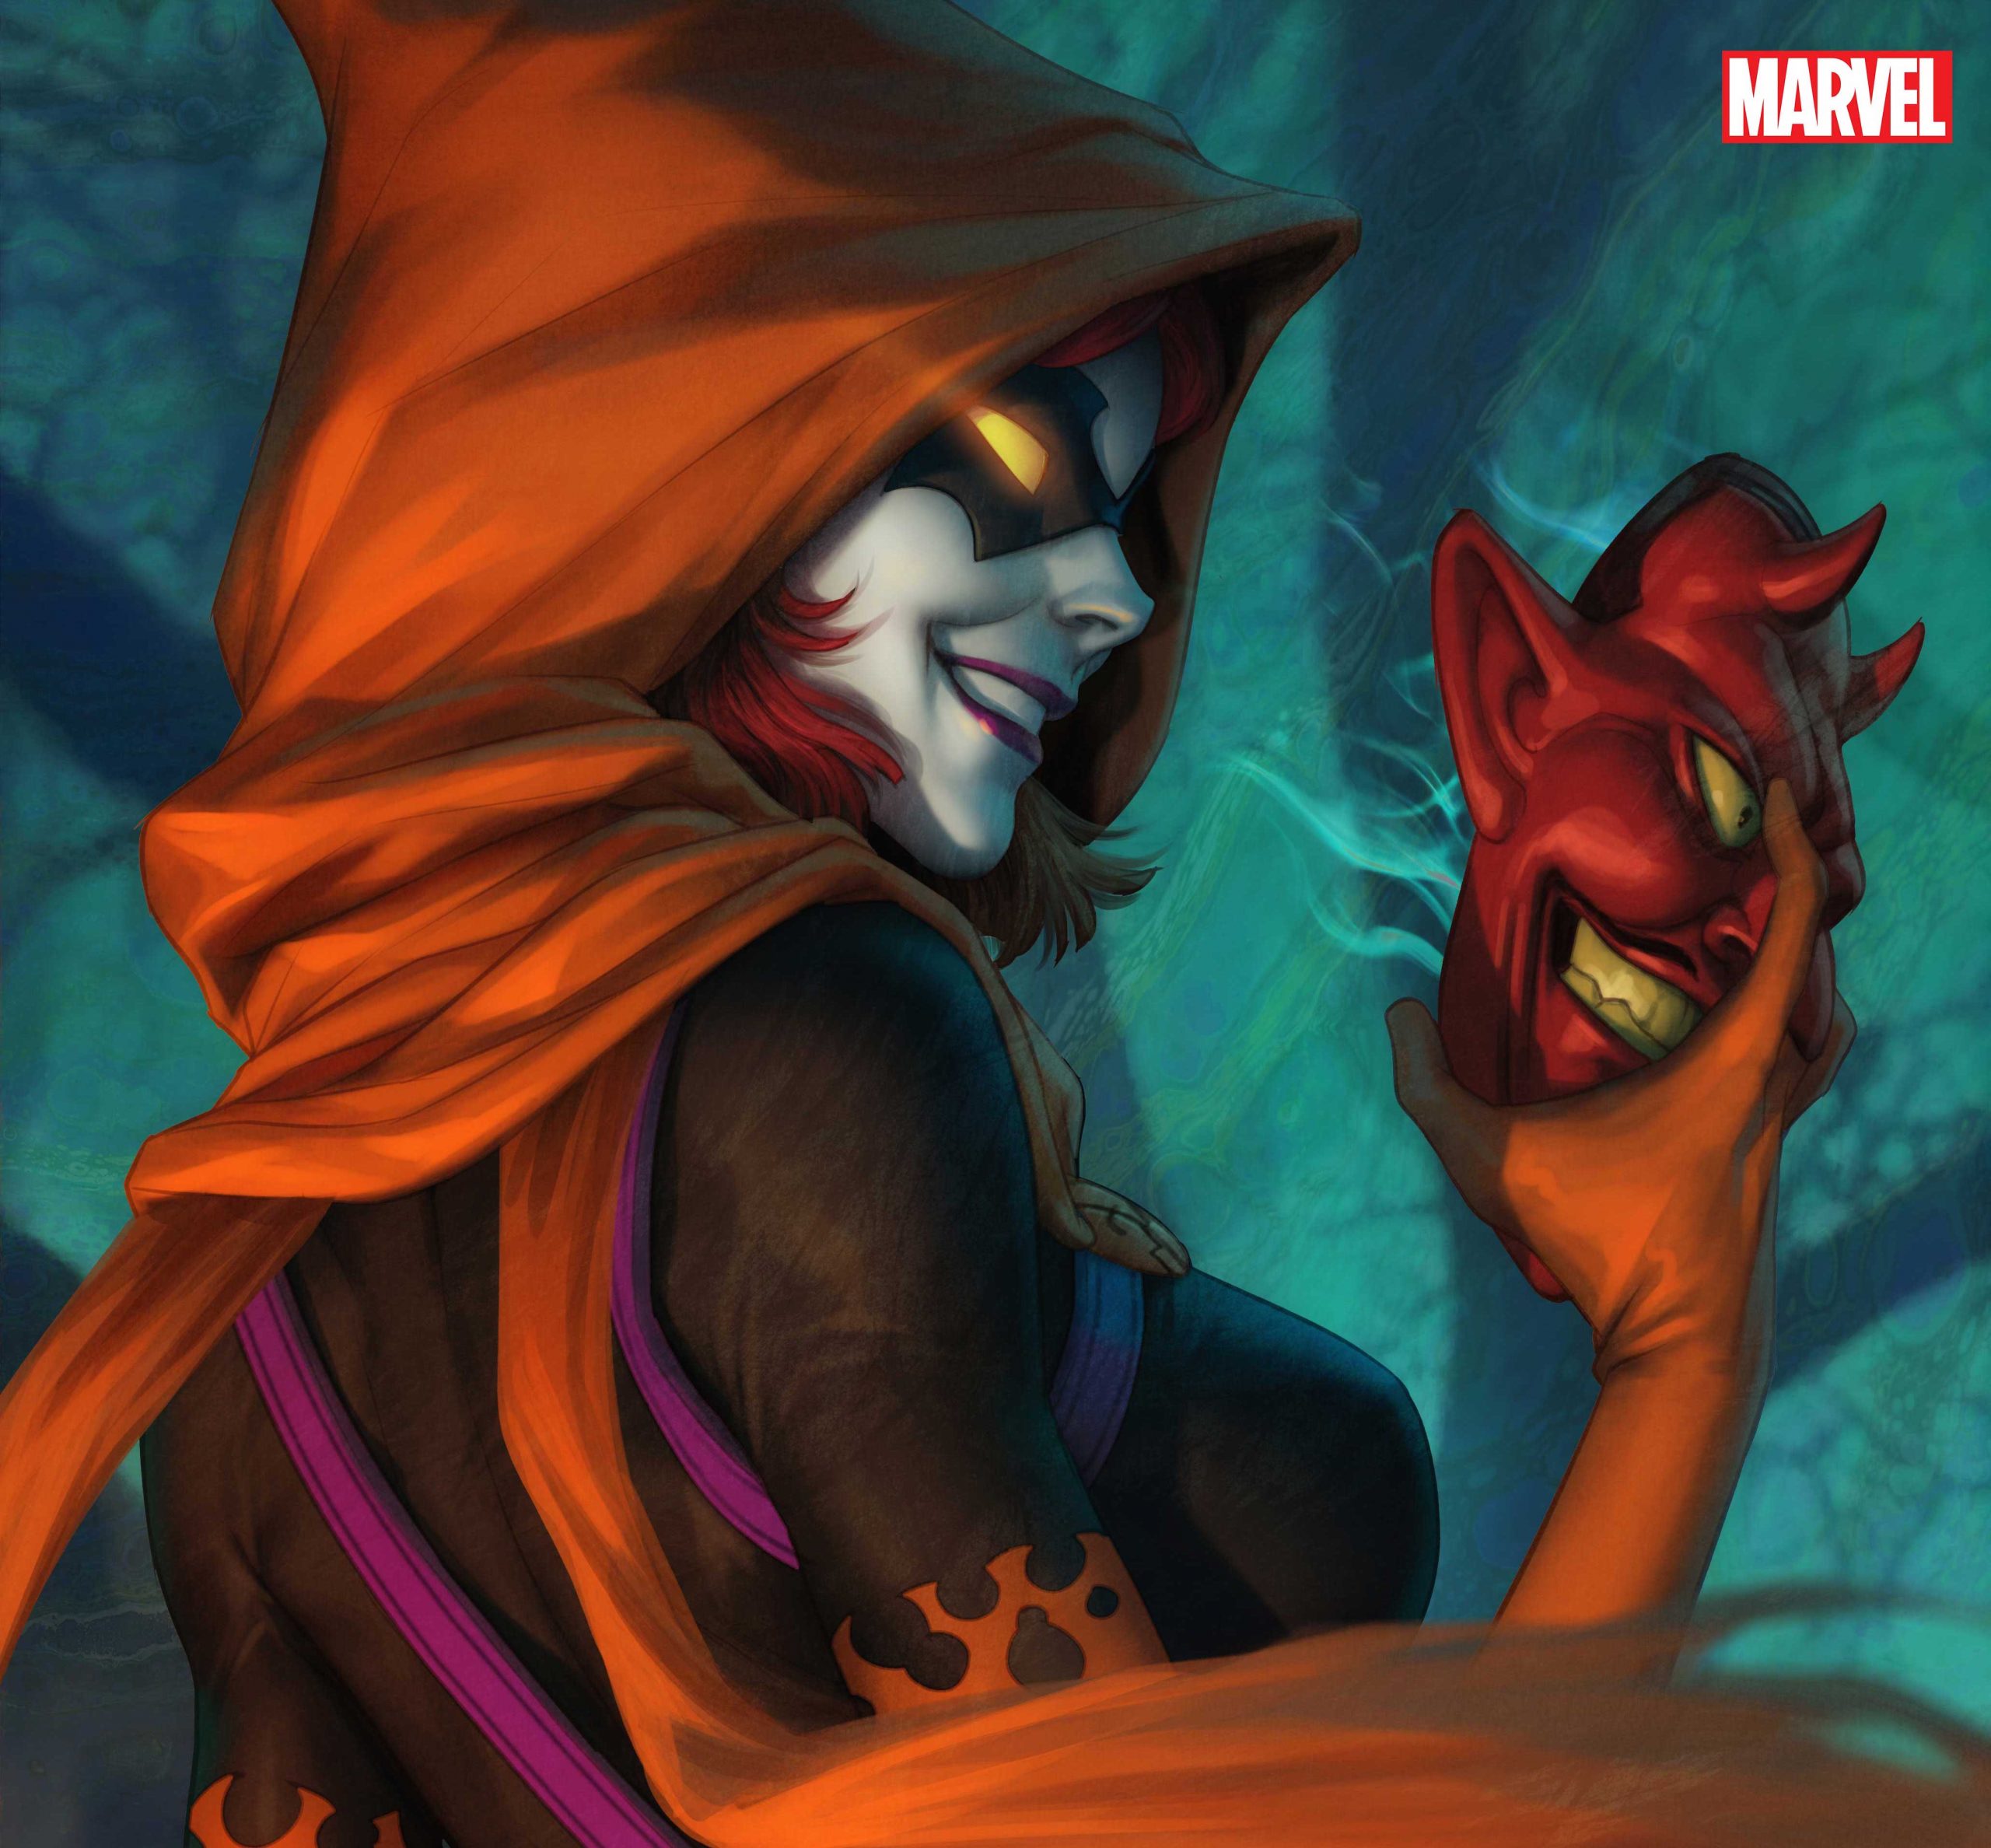 Marvel releases 'Hallows' Eve' #1 Artgerm variant cover